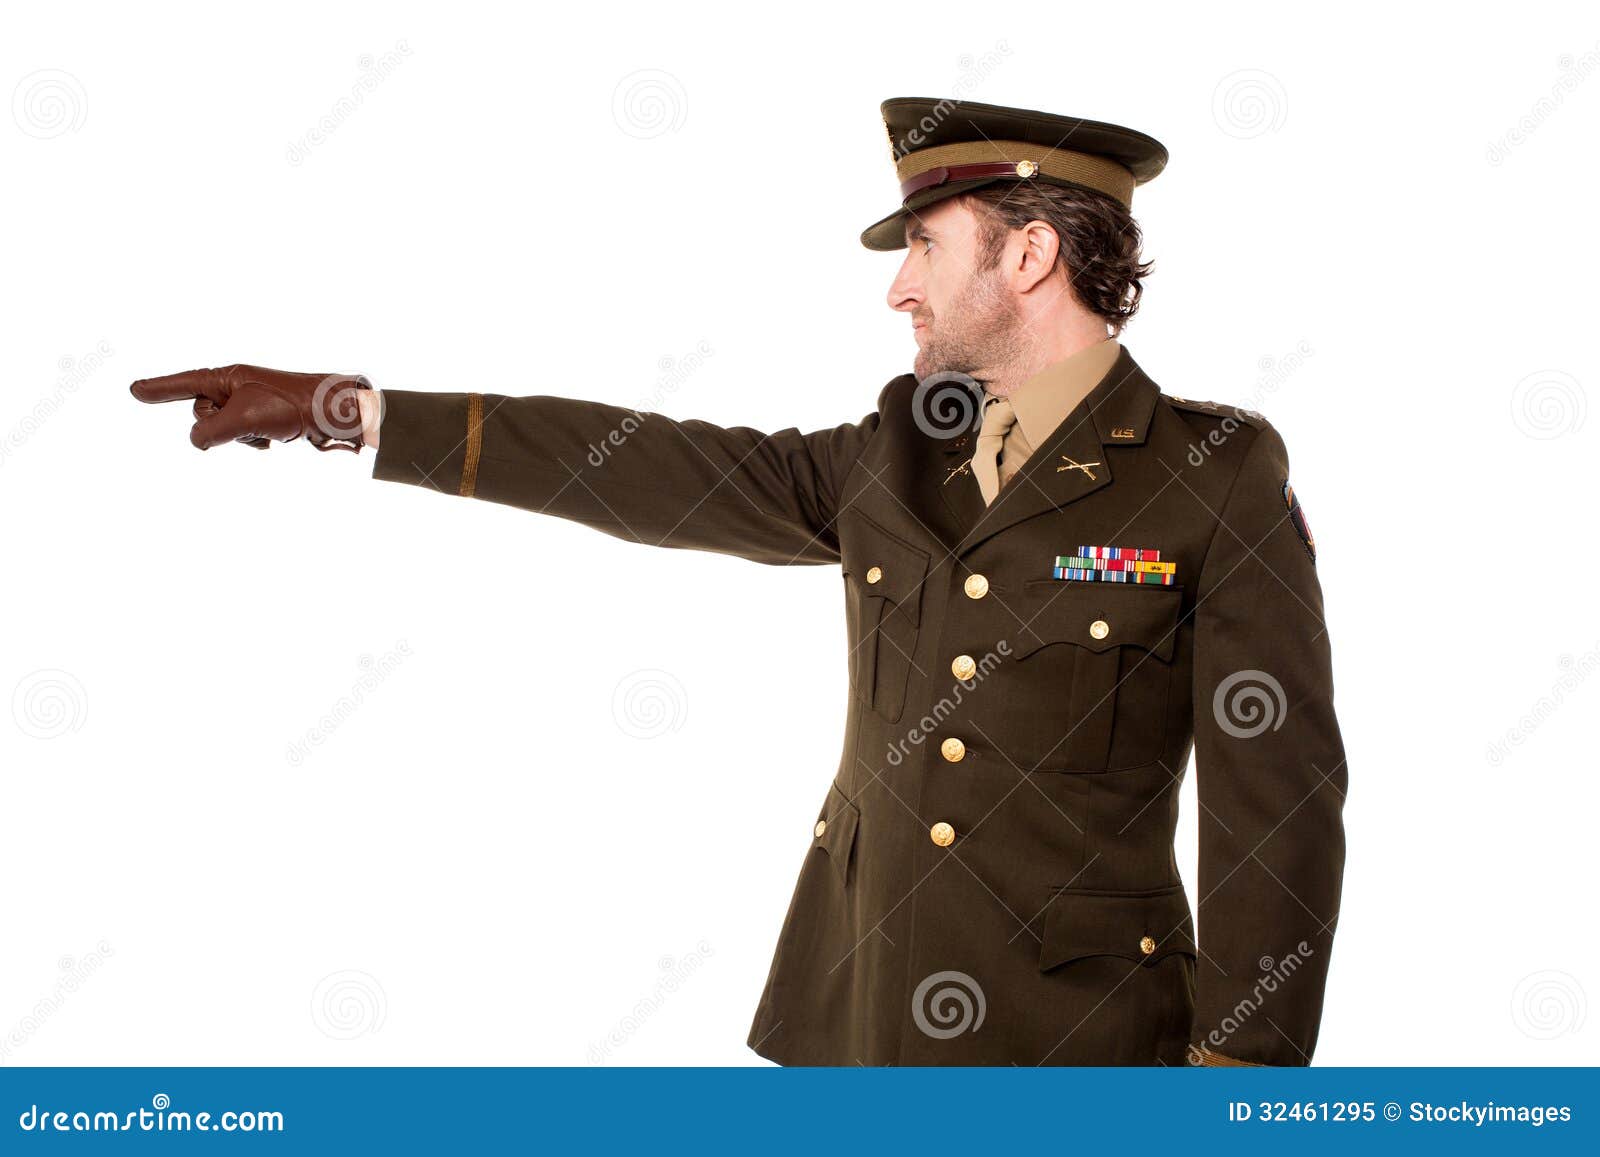 Military Personnel Pointing Away Royalty Free Stock Photo - Image: 32461295